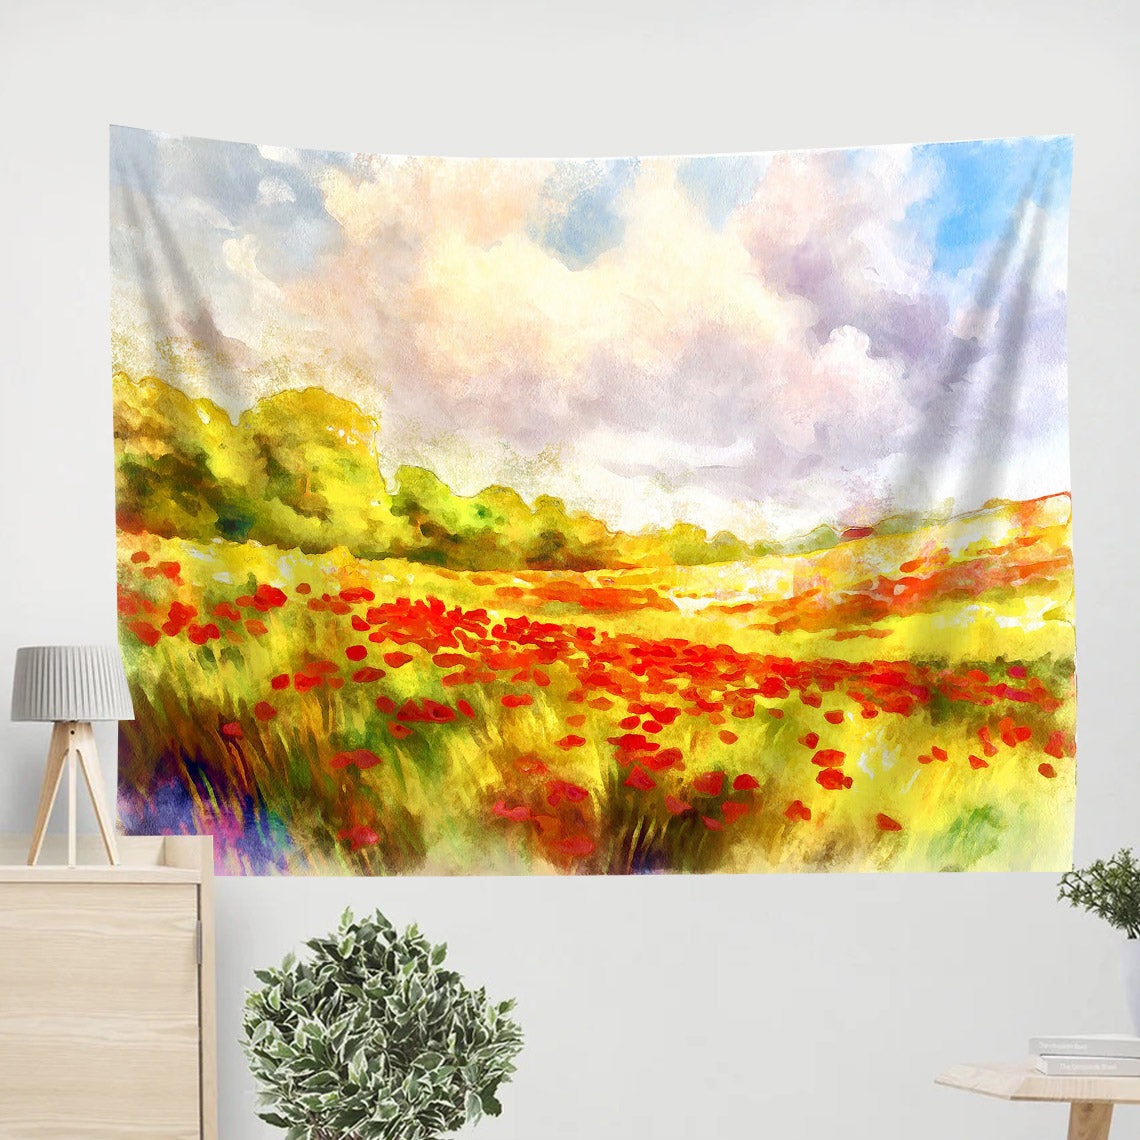 Red Poppies Field Painting Tapestry 2 - Tapestry Wall Decor - Home Decor Living Room